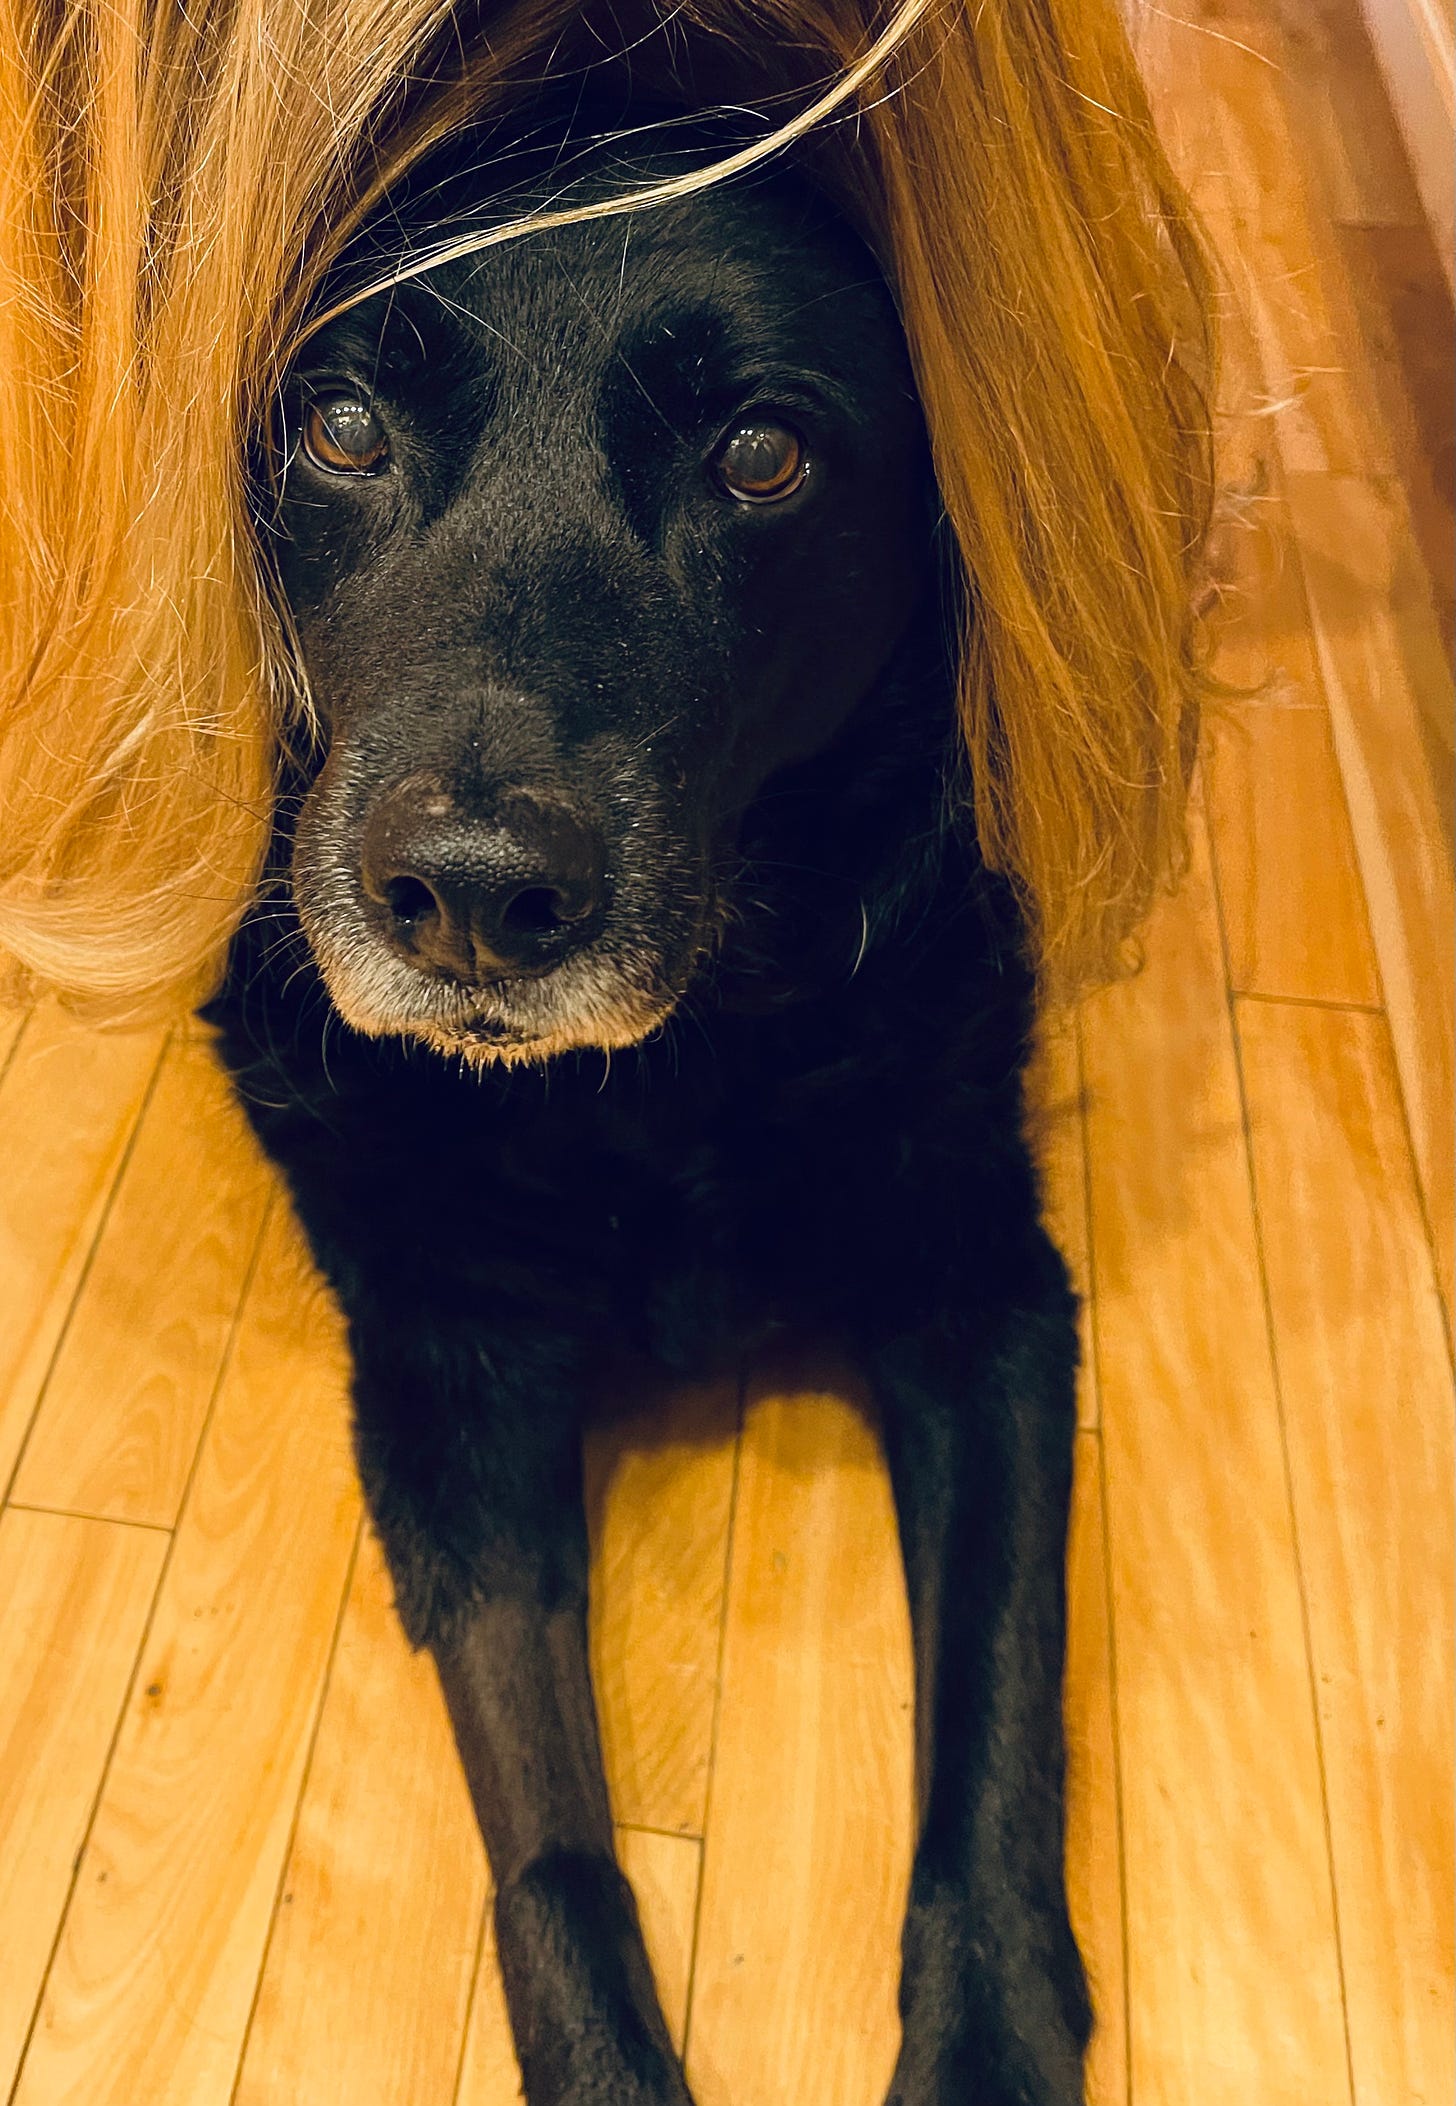 Black lab mix with blonde hair over his head